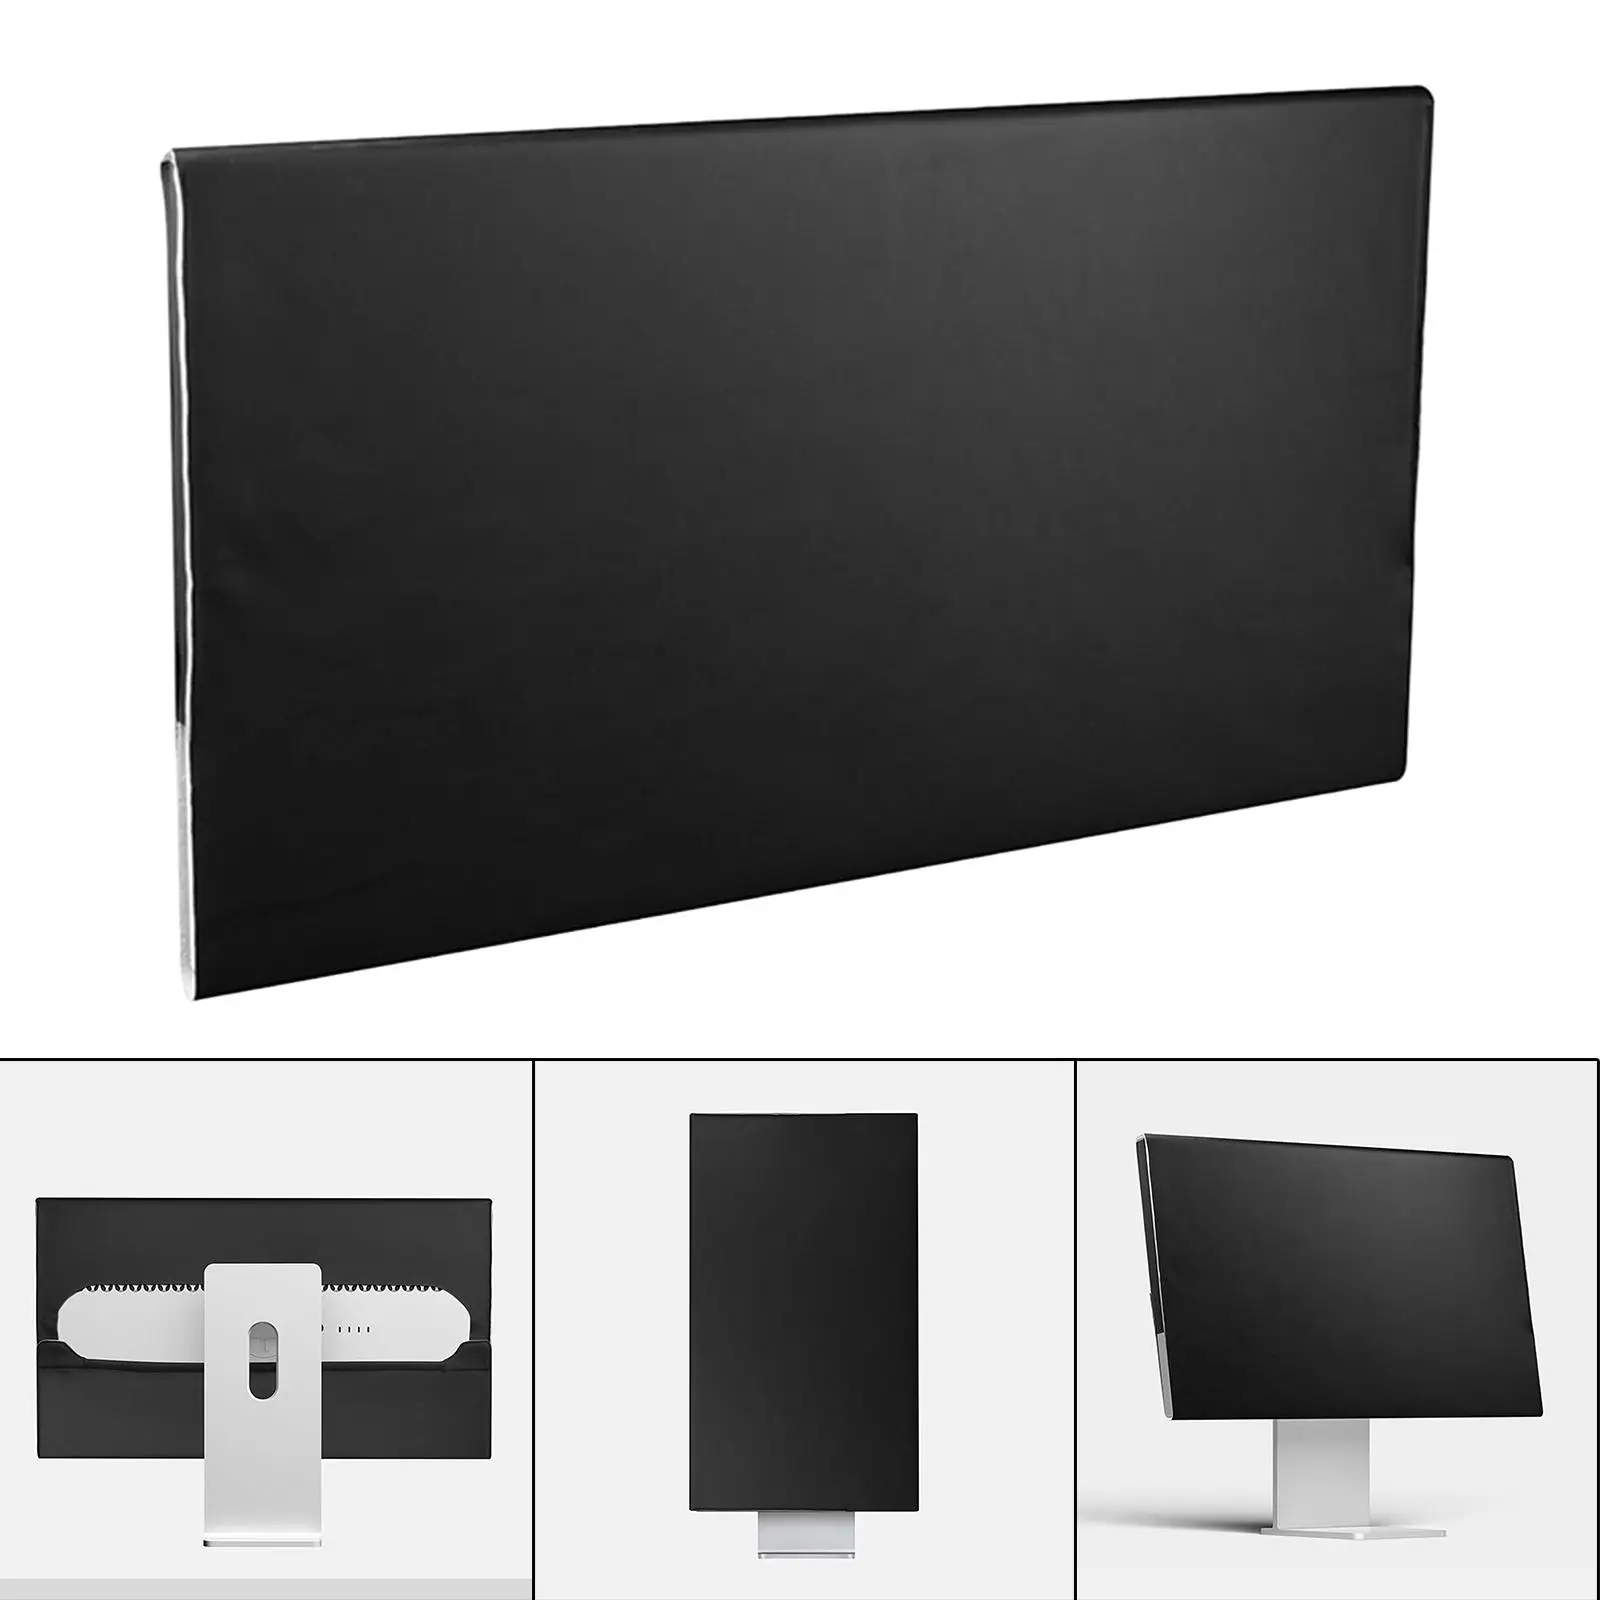 Computer Monitor 32inch Smooth Desktop Dispaly Protective Sleeve Water Resistant Xdr